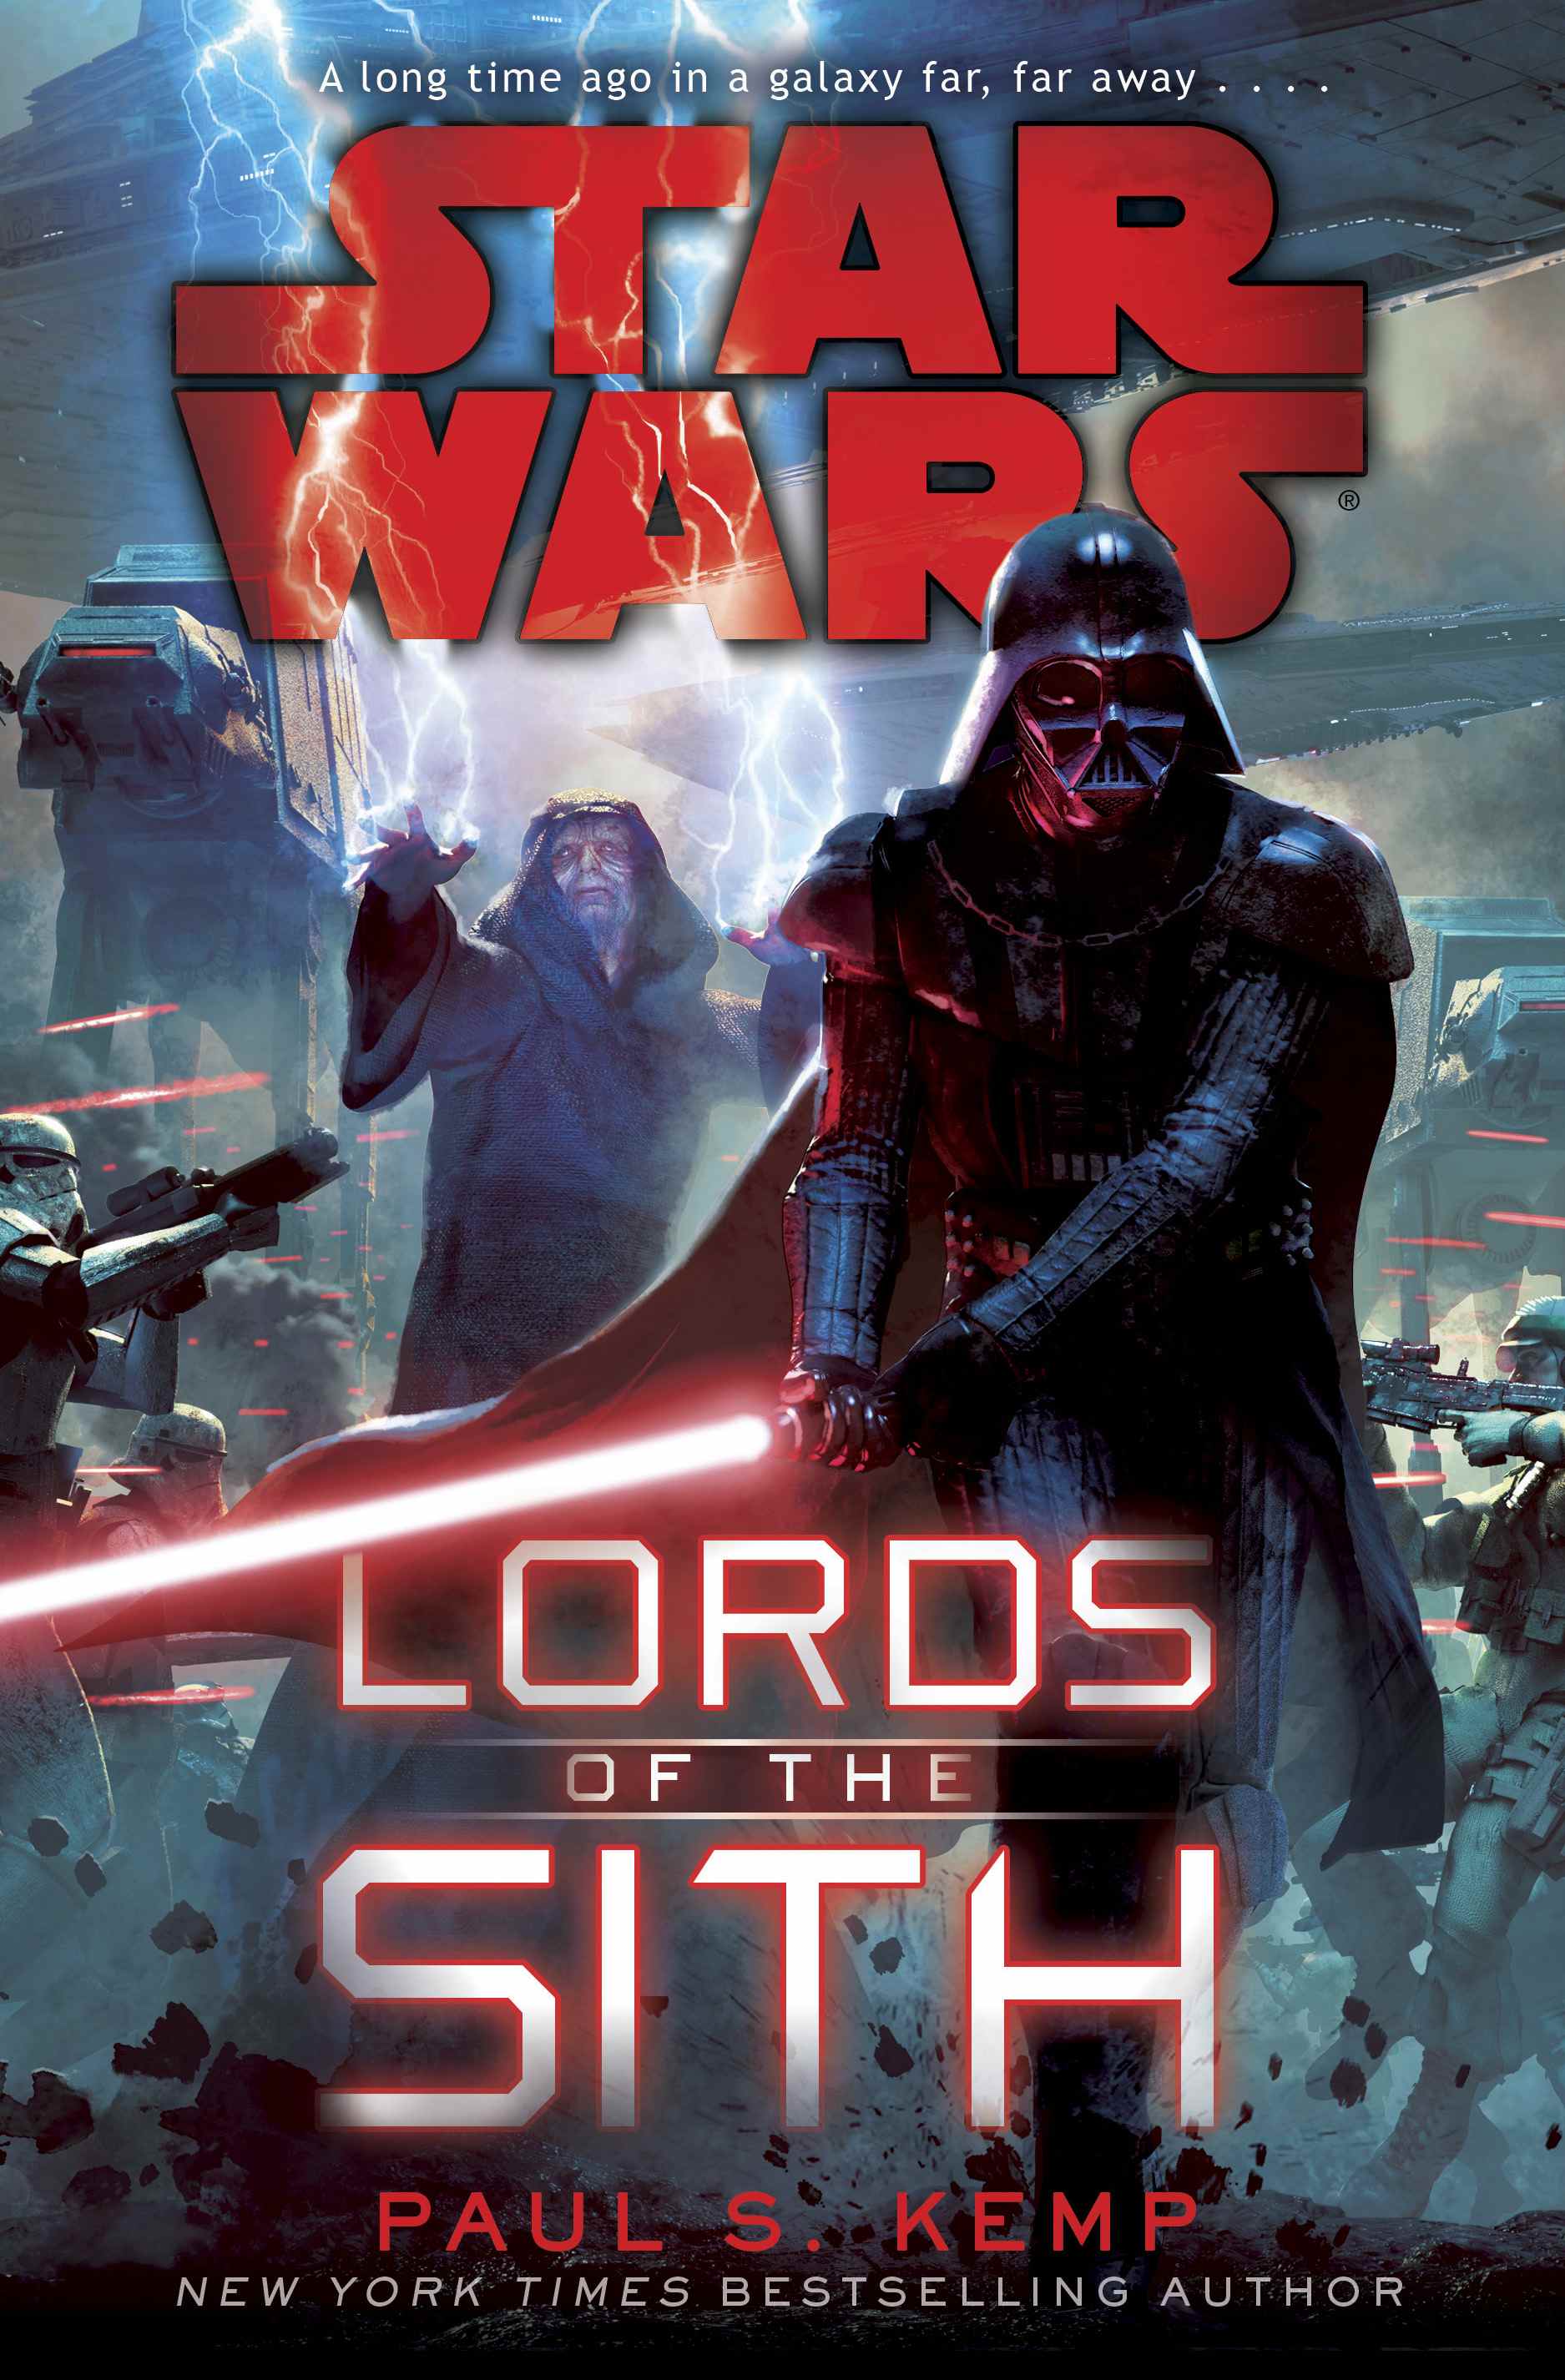 Sith Lords Revealed: Star Wars Books About Sith Lords